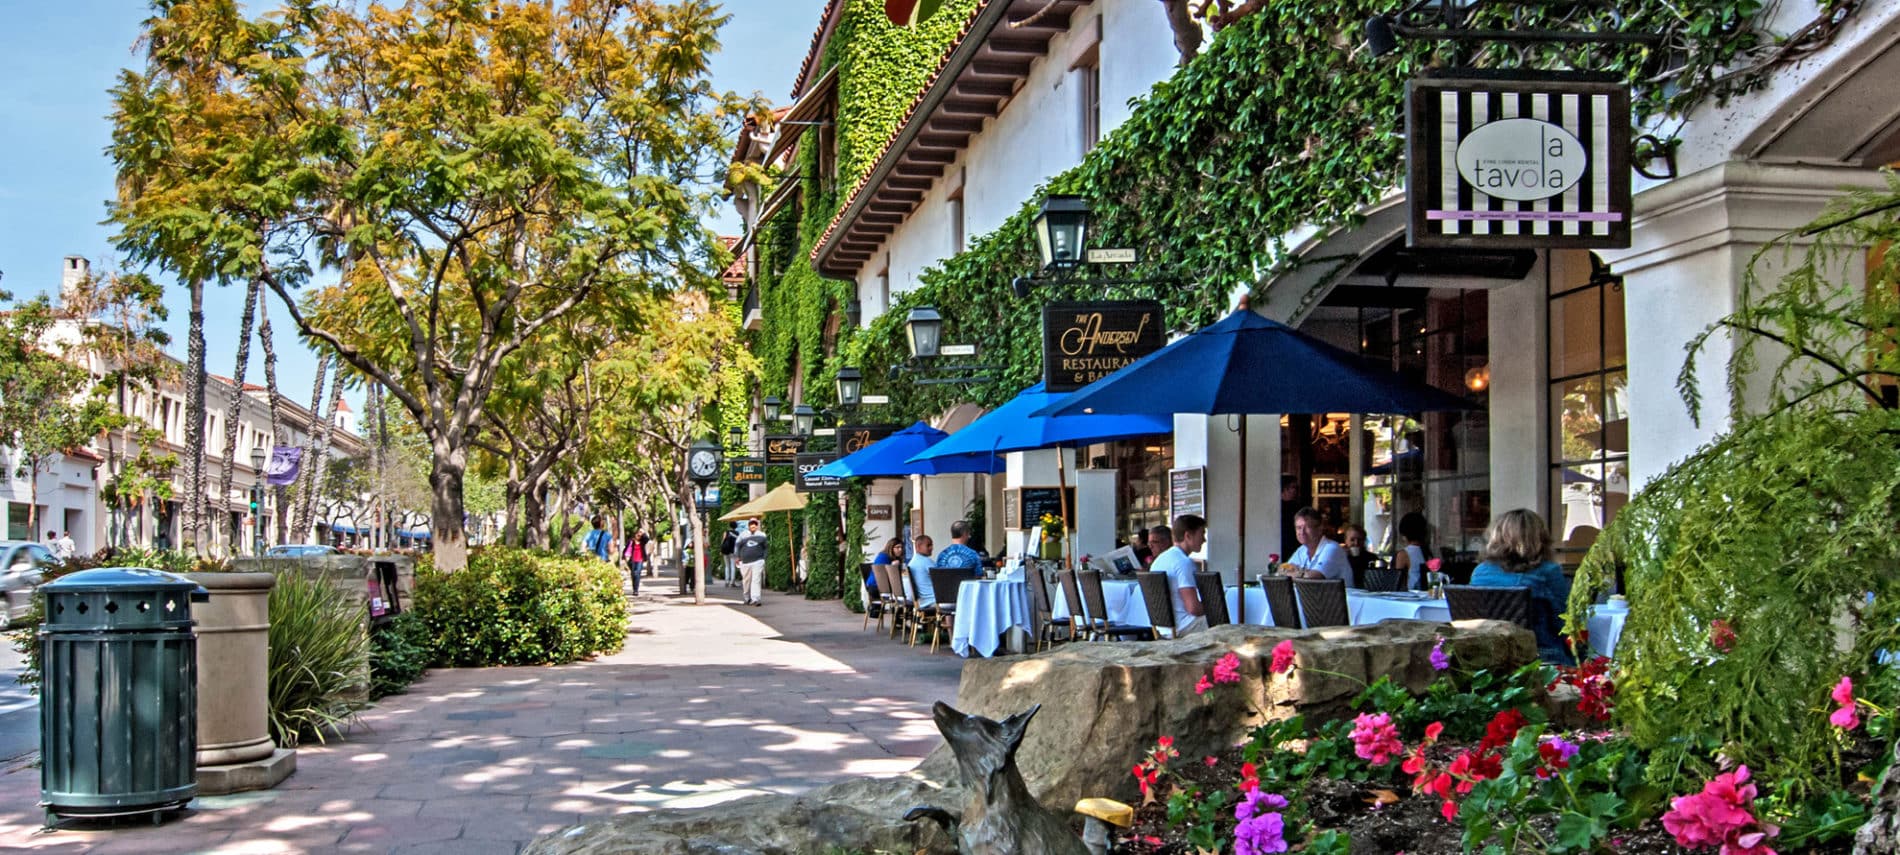 A sidewalk with bright flowers in the foreground, a Spanish-style restaurant with red roof and diners eating under blue table umbrellas.